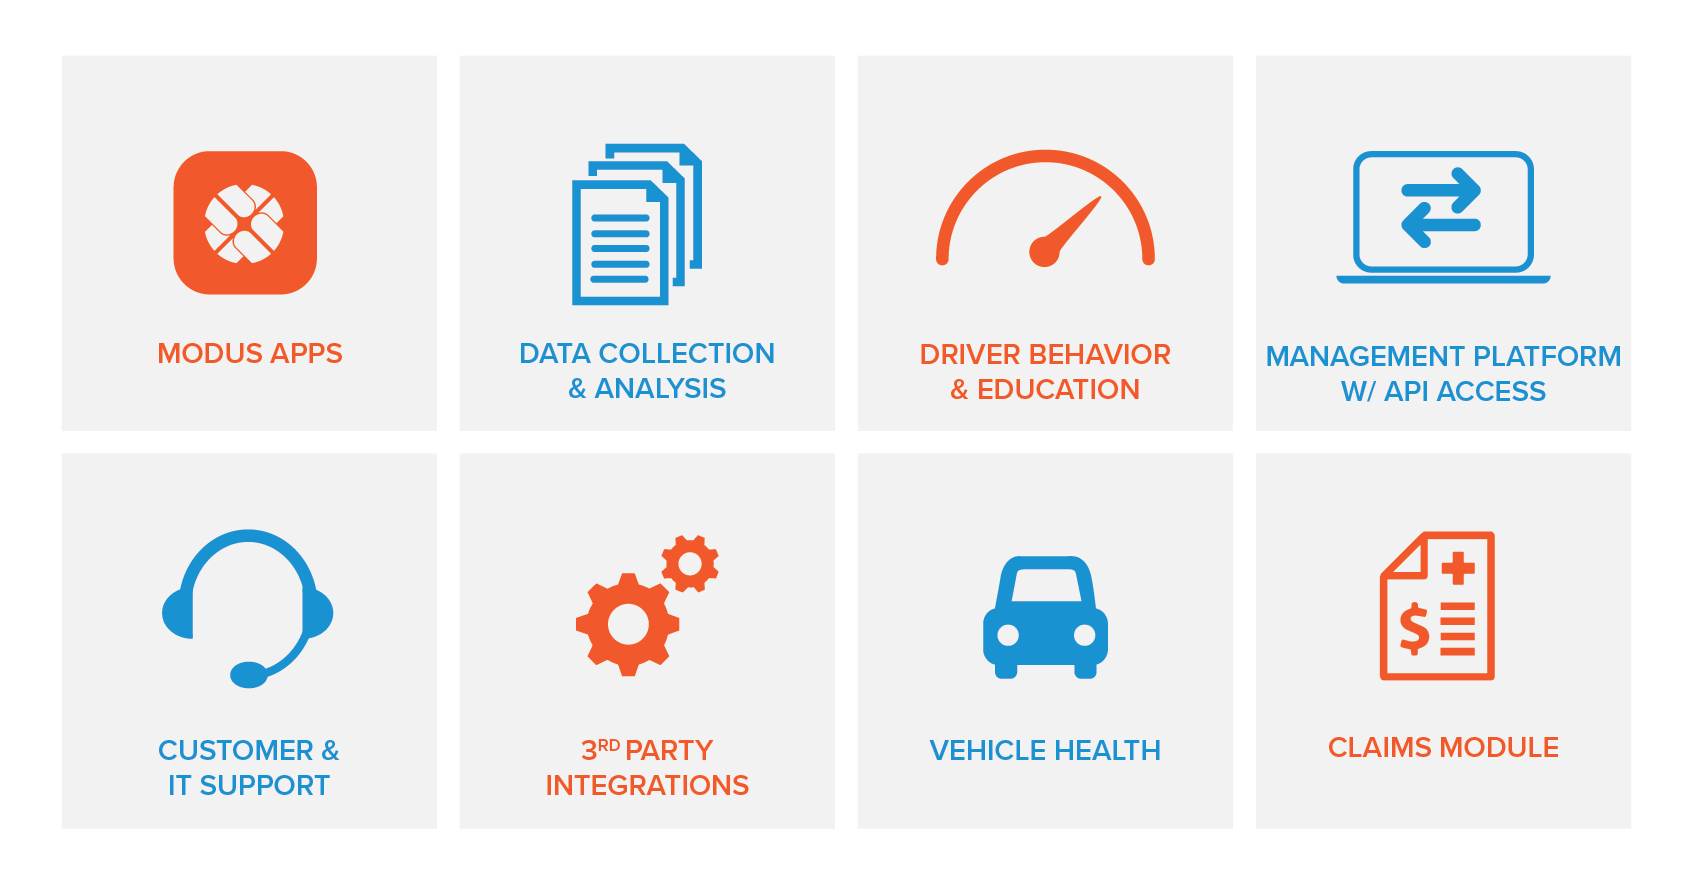 Modus Apps, Data Collection & Analysis, Driver Behavior & Education, Management Platform with API Access, Customer & IT Support, 3rd Party Integrations, Vehicle Health, Claims Module icons